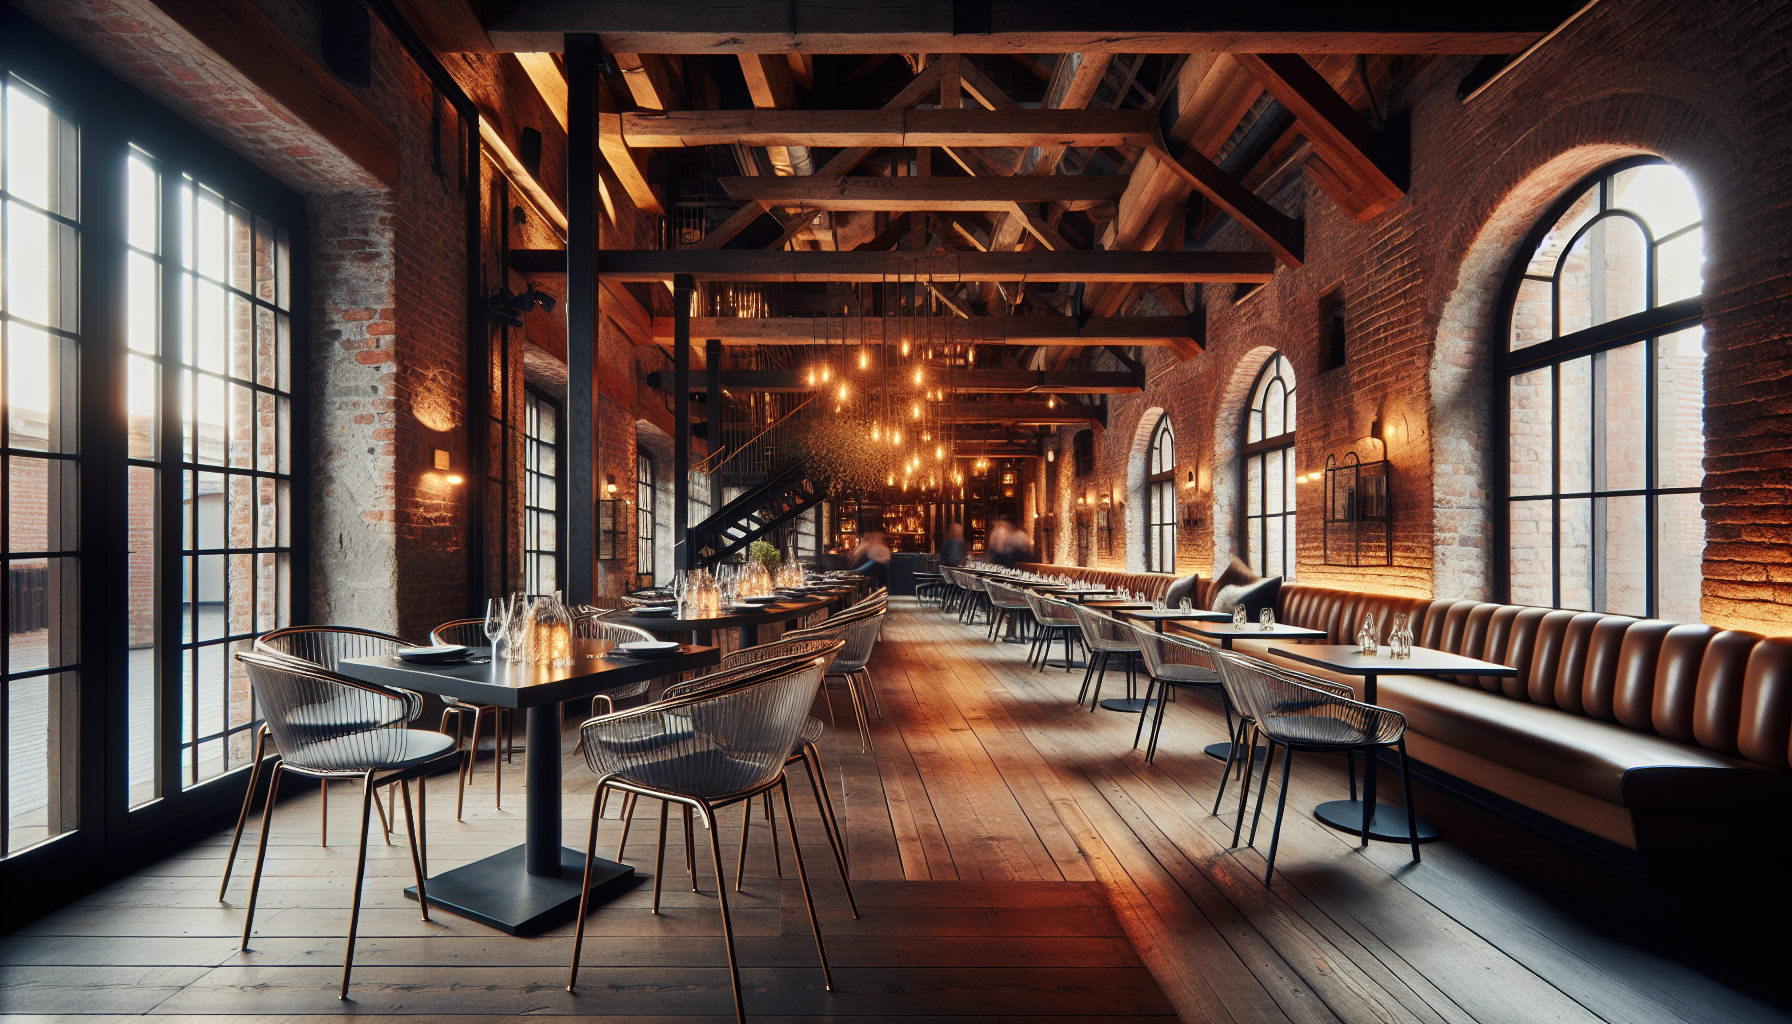 Elegant and stylish interior of Spoon and Stable restaurant